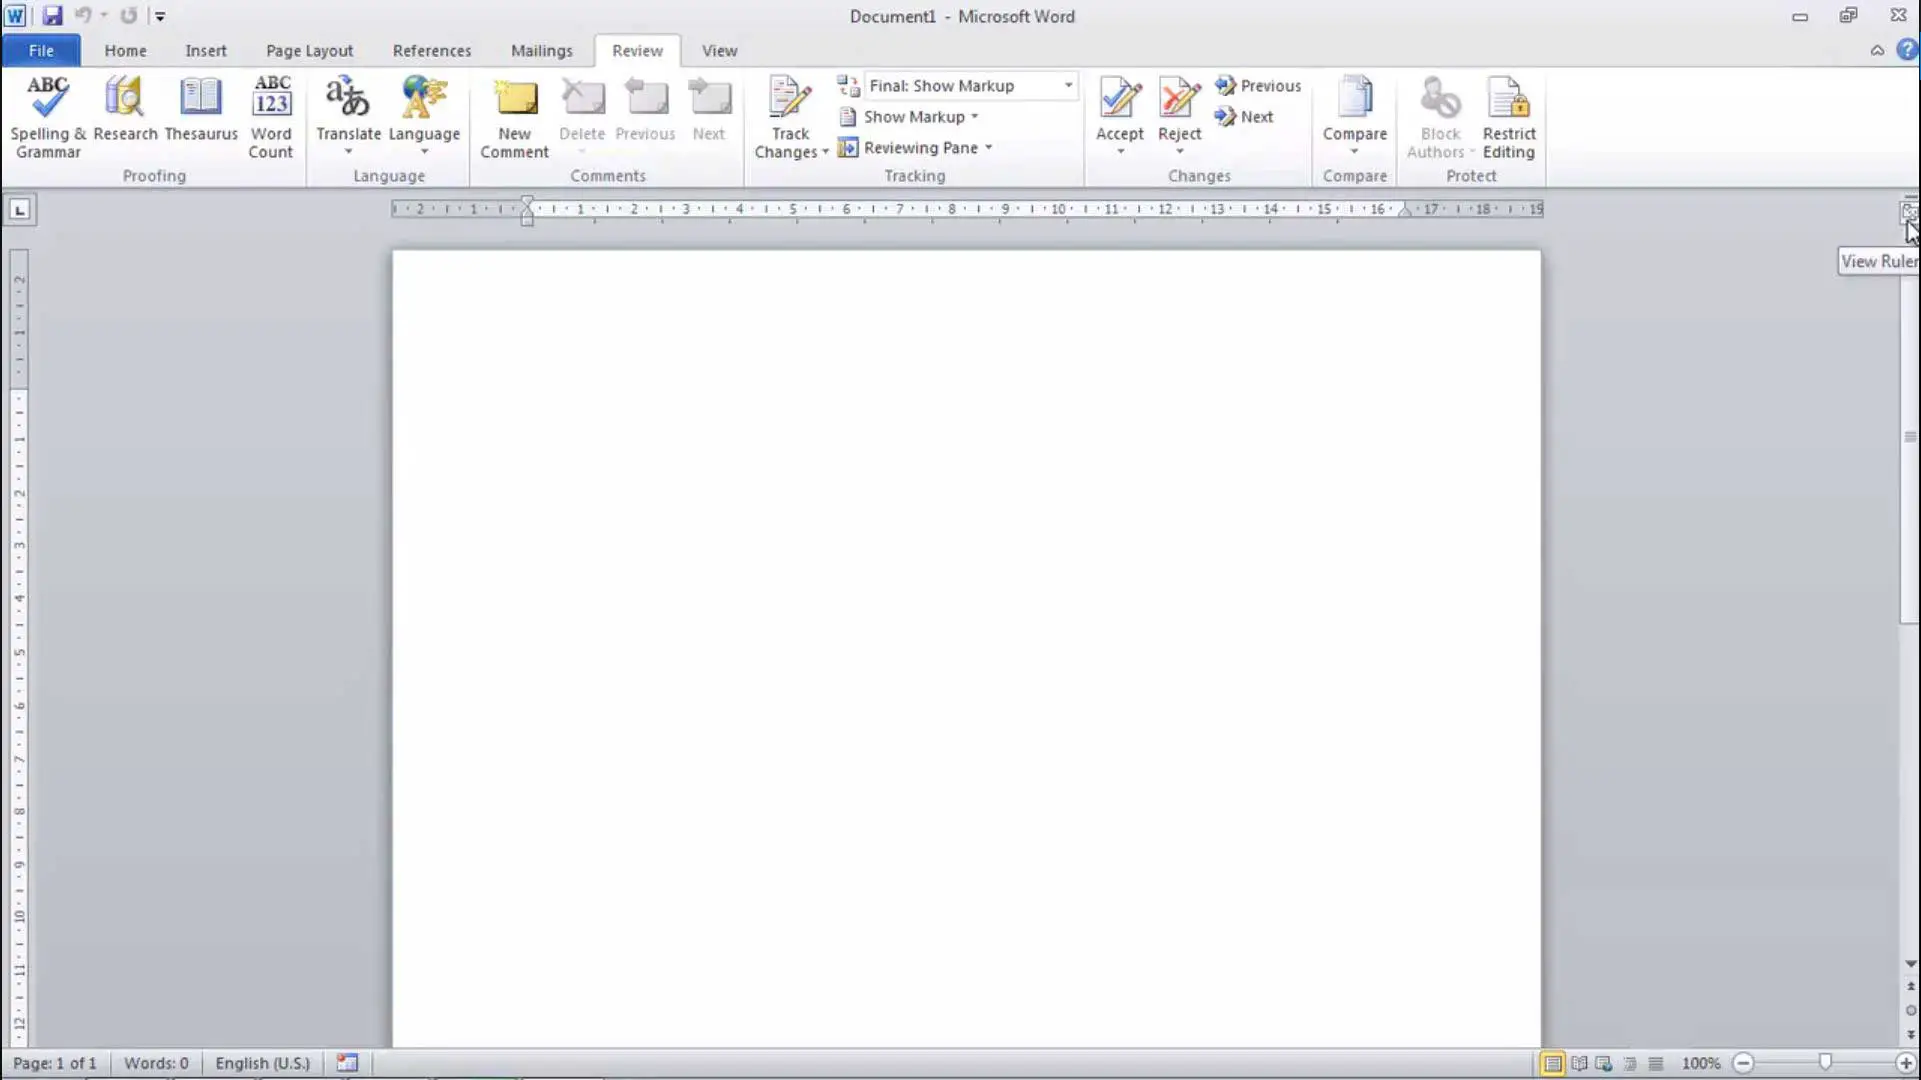 microsoft office word 2010 free download full version for windows 7